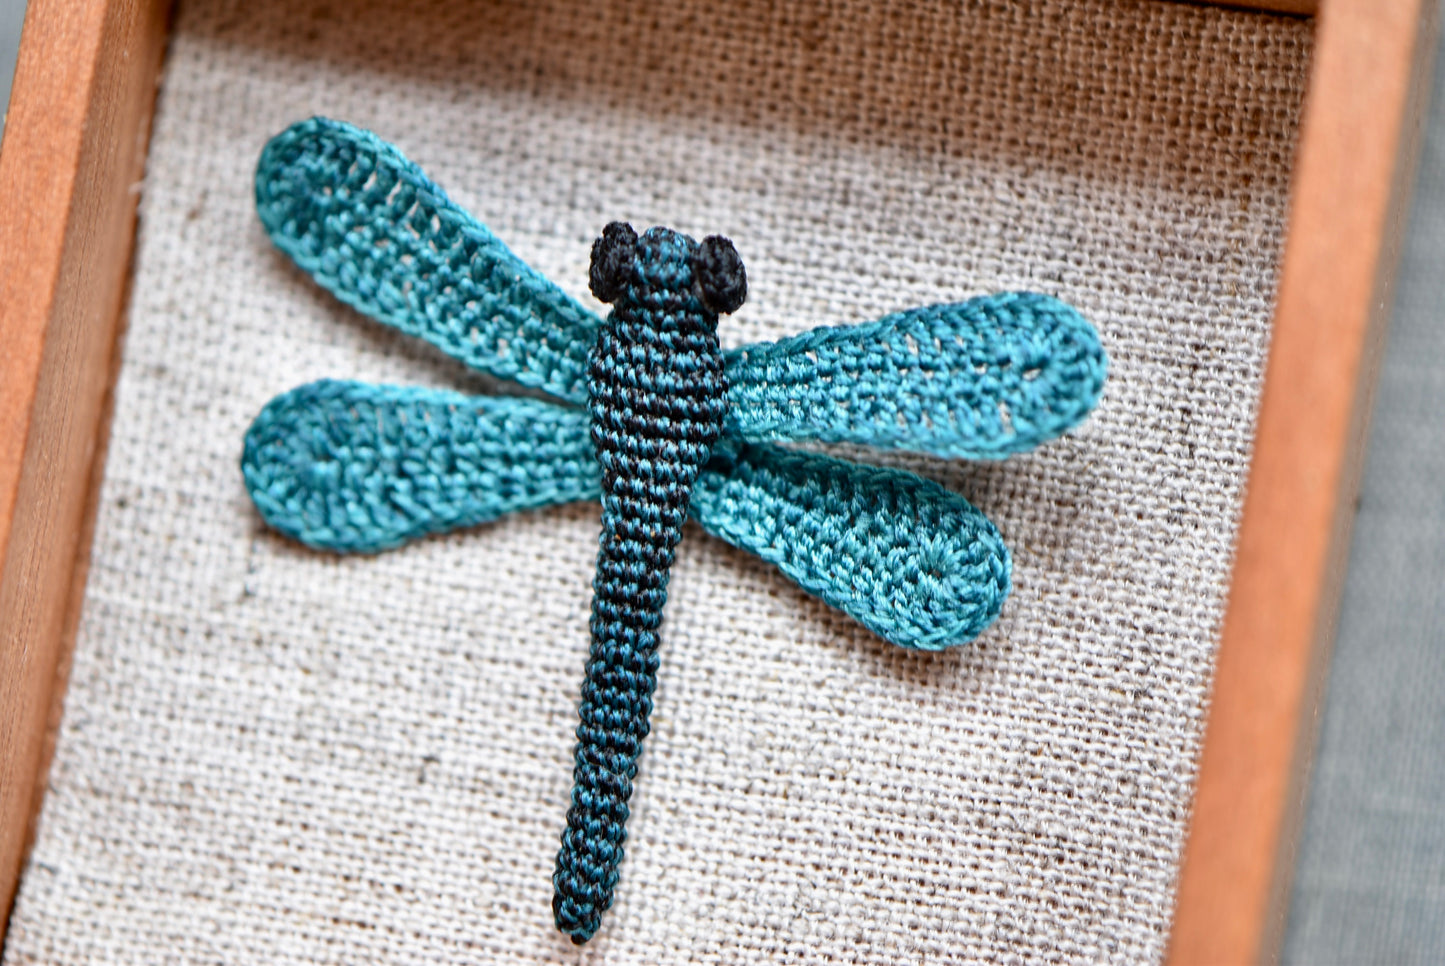 Crocheted Tiny Dragonfly - OOAK - Collaboration with Tinybellsoftheprairy